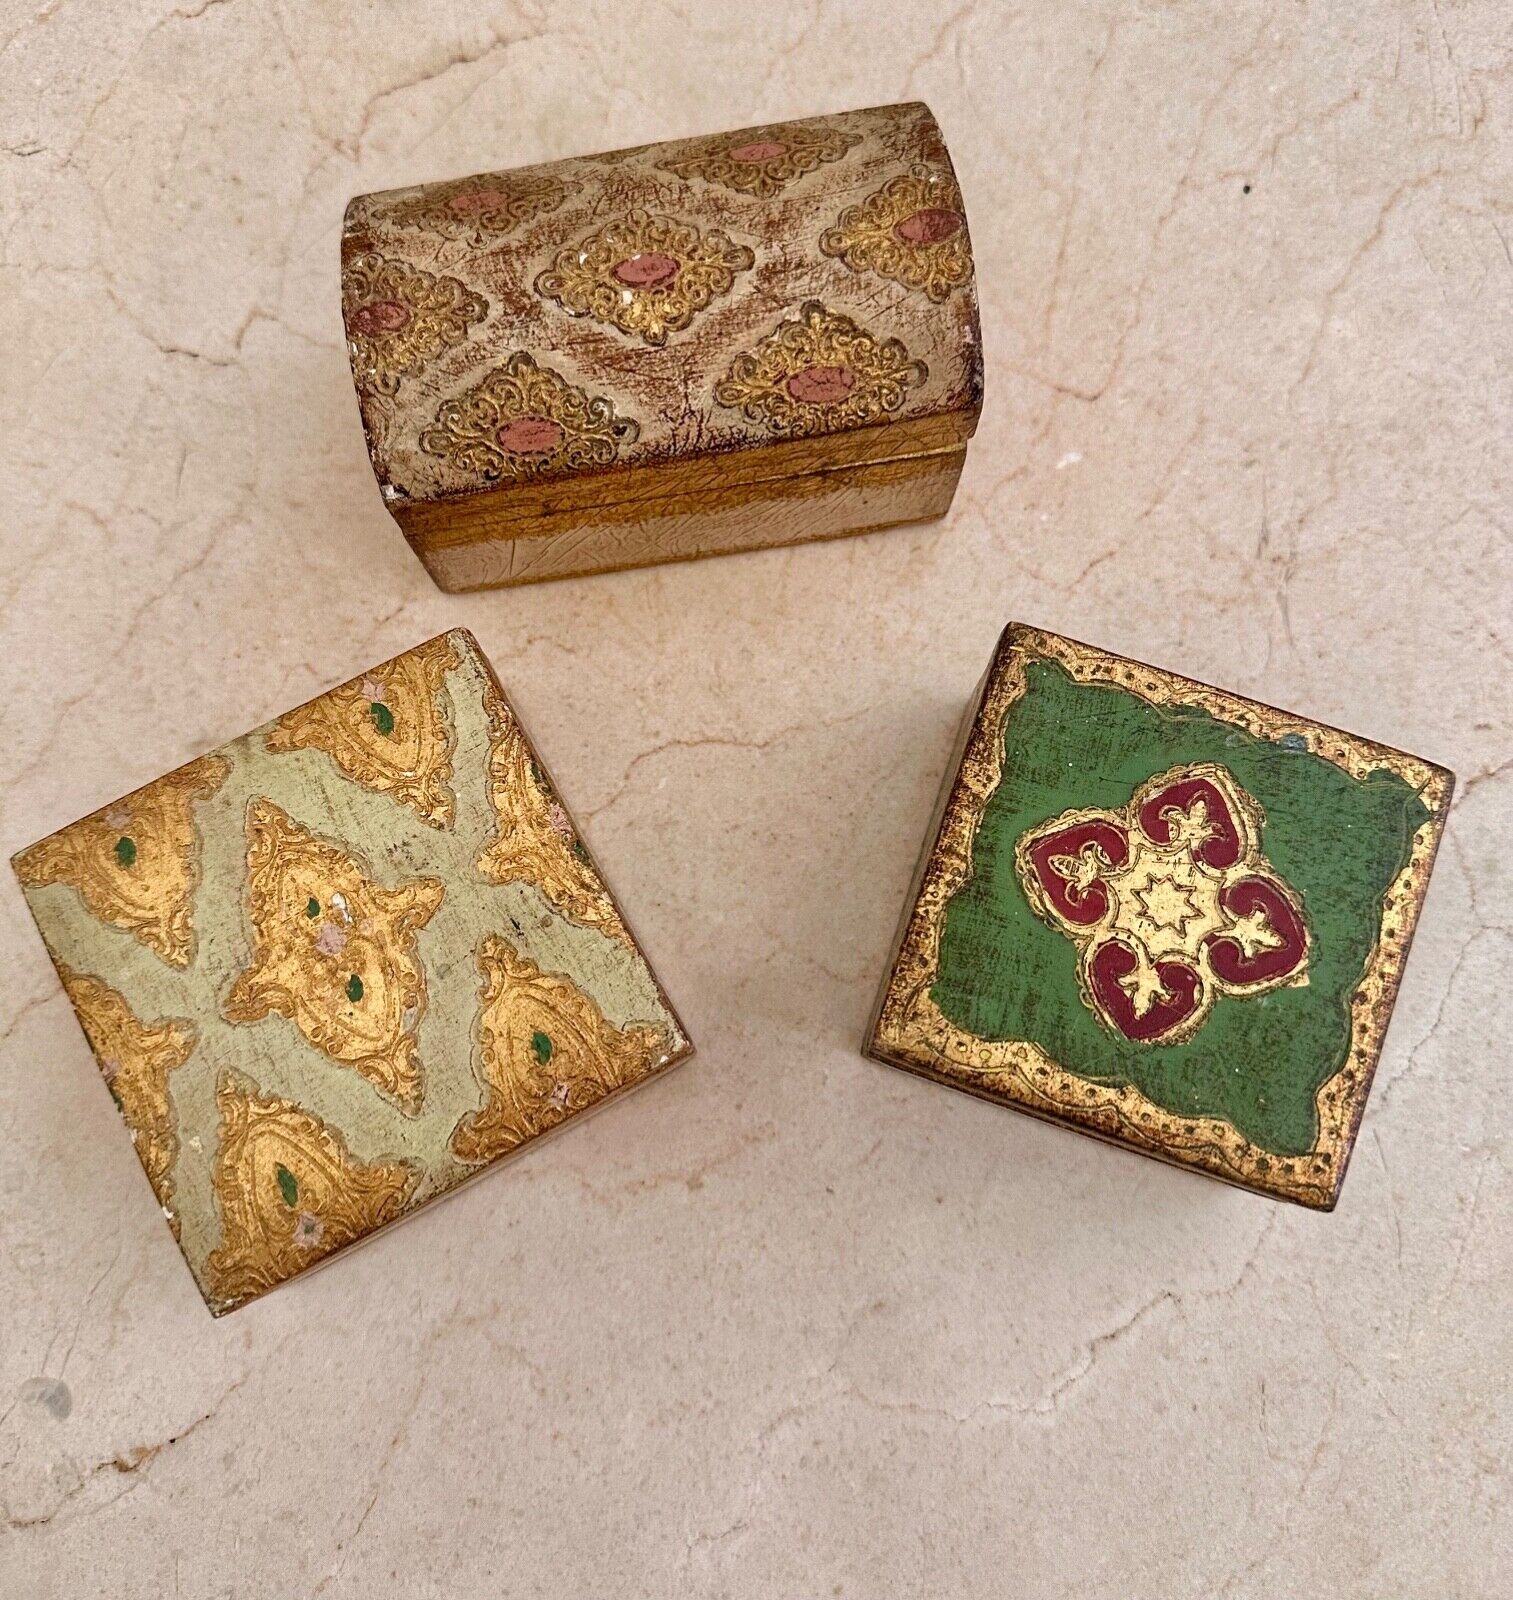 Vintage Hinged Italian Florentine Boxes collection